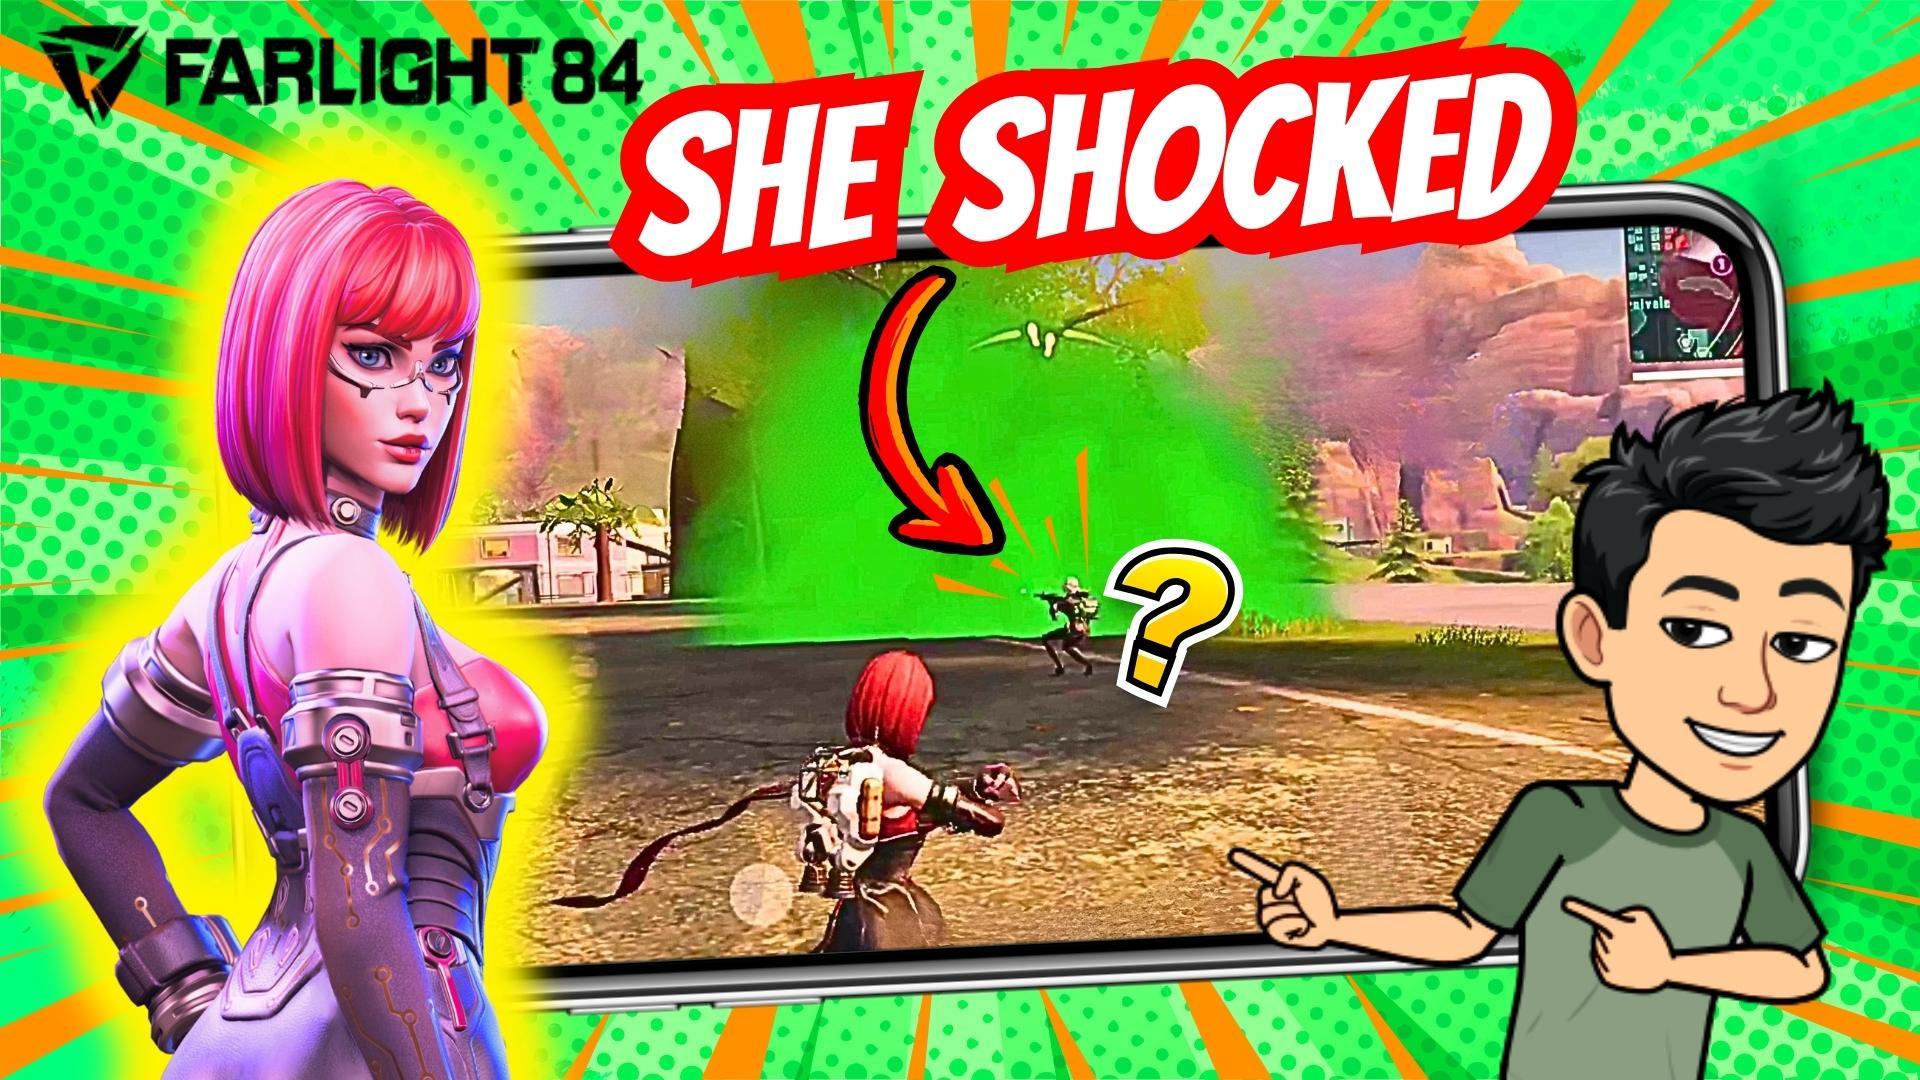 SHE SHOCKED WHEN HIS TEAMMATE USED SMOKE GAS | FARLIGHT 84 FUNNY GAMEPLAY